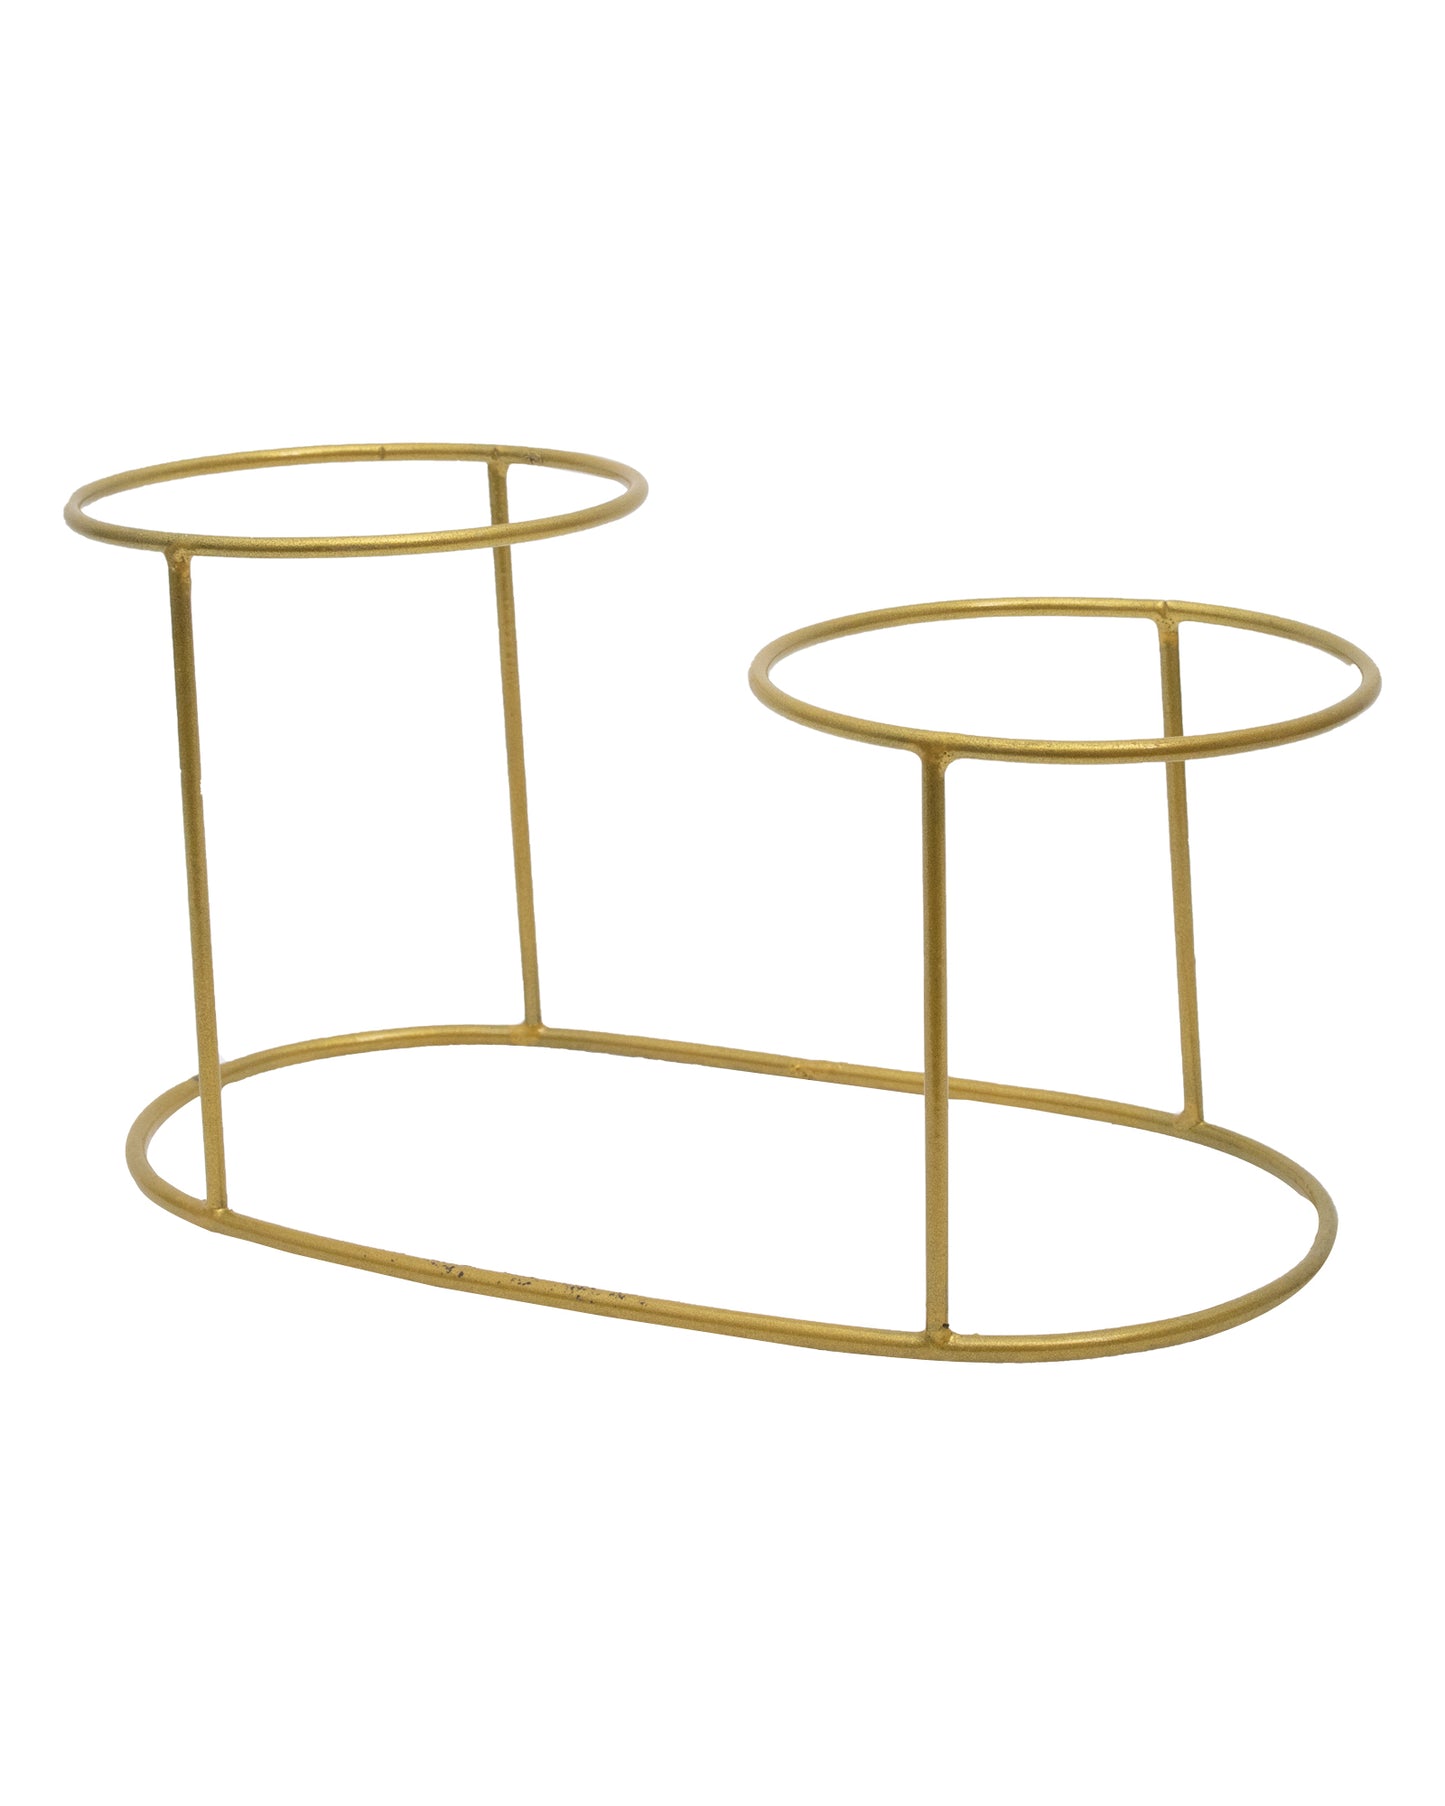 Combo of 2 Table Top Designer Metallic Gold Metal Stand with Planters, Small White Metal Pots for Livingroom, Balcony & Home Decoration, Twin Oval Planter